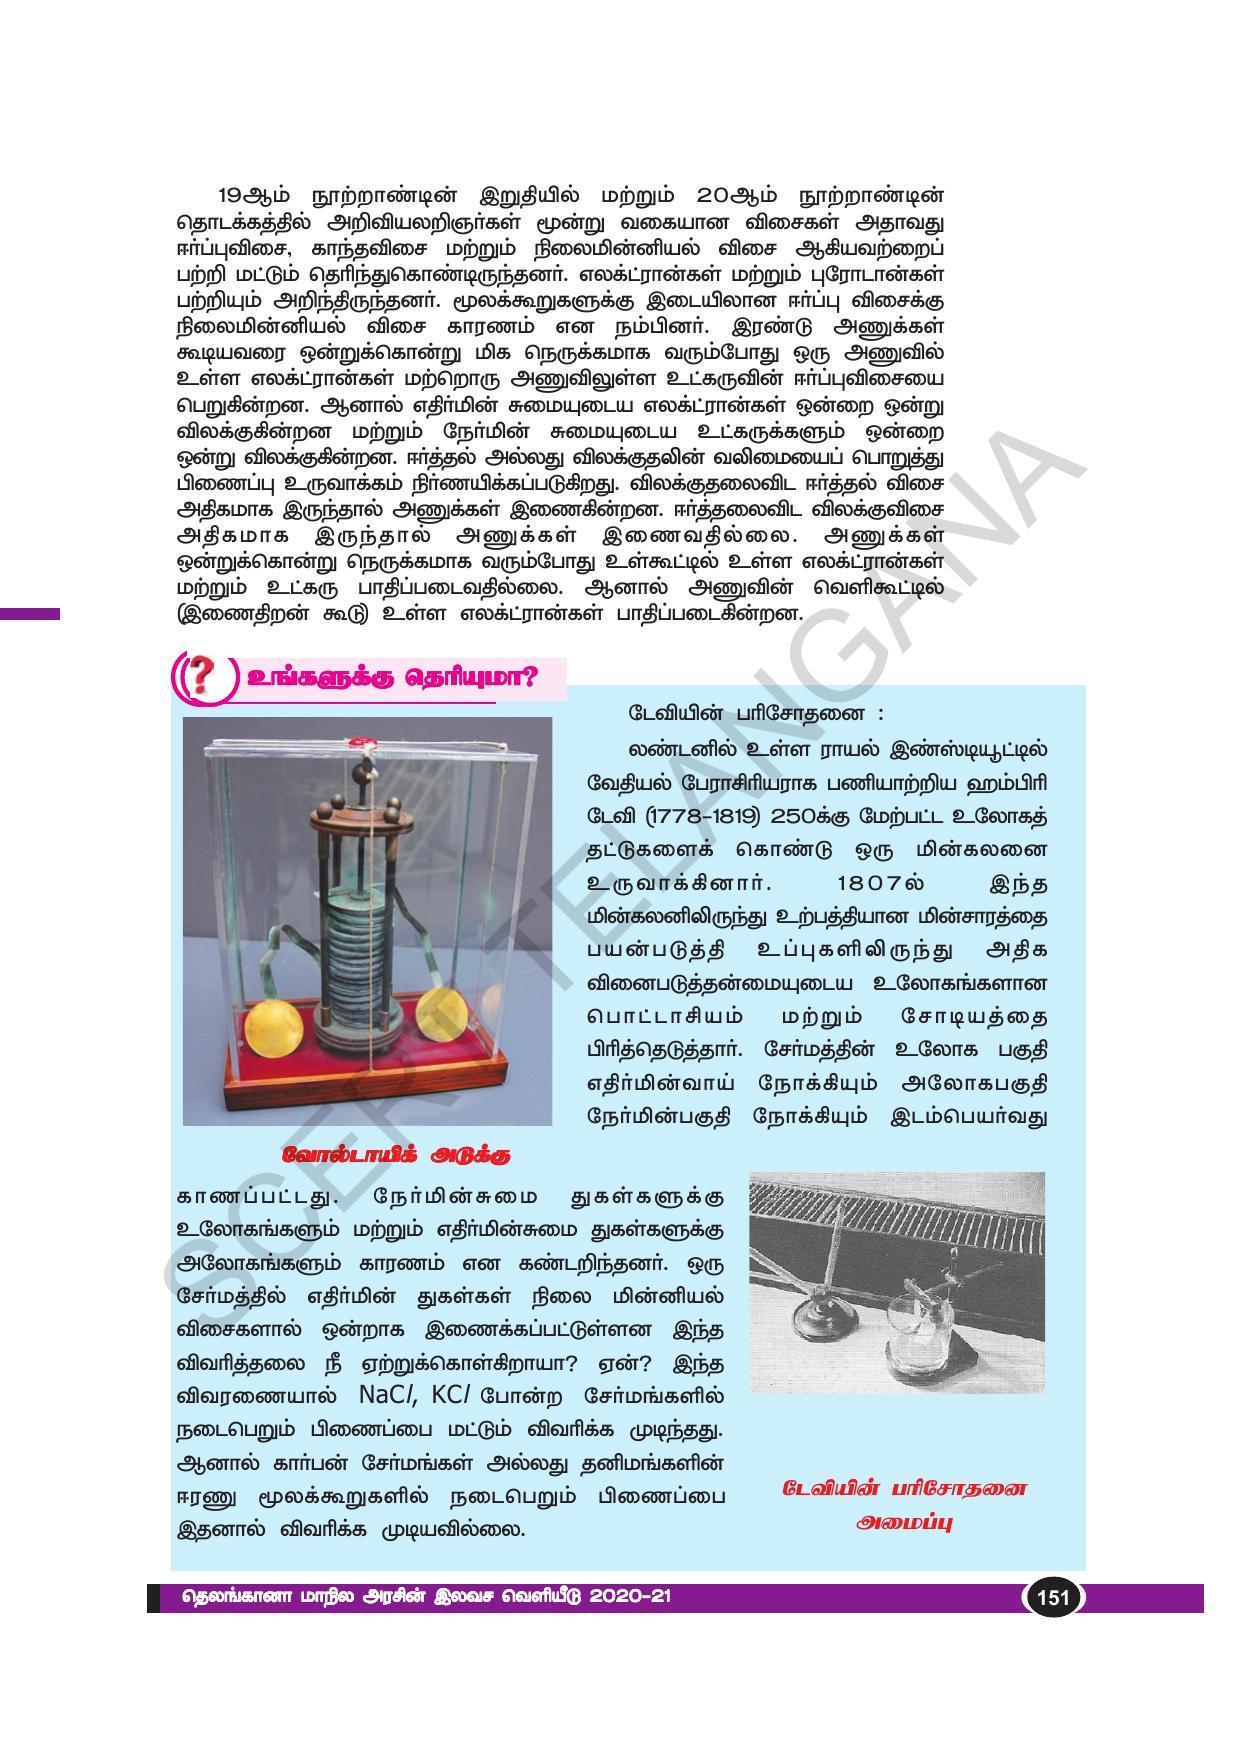 TS SCERT Class 10 Physical Science(Tamil Medium) Text Book - Page 163